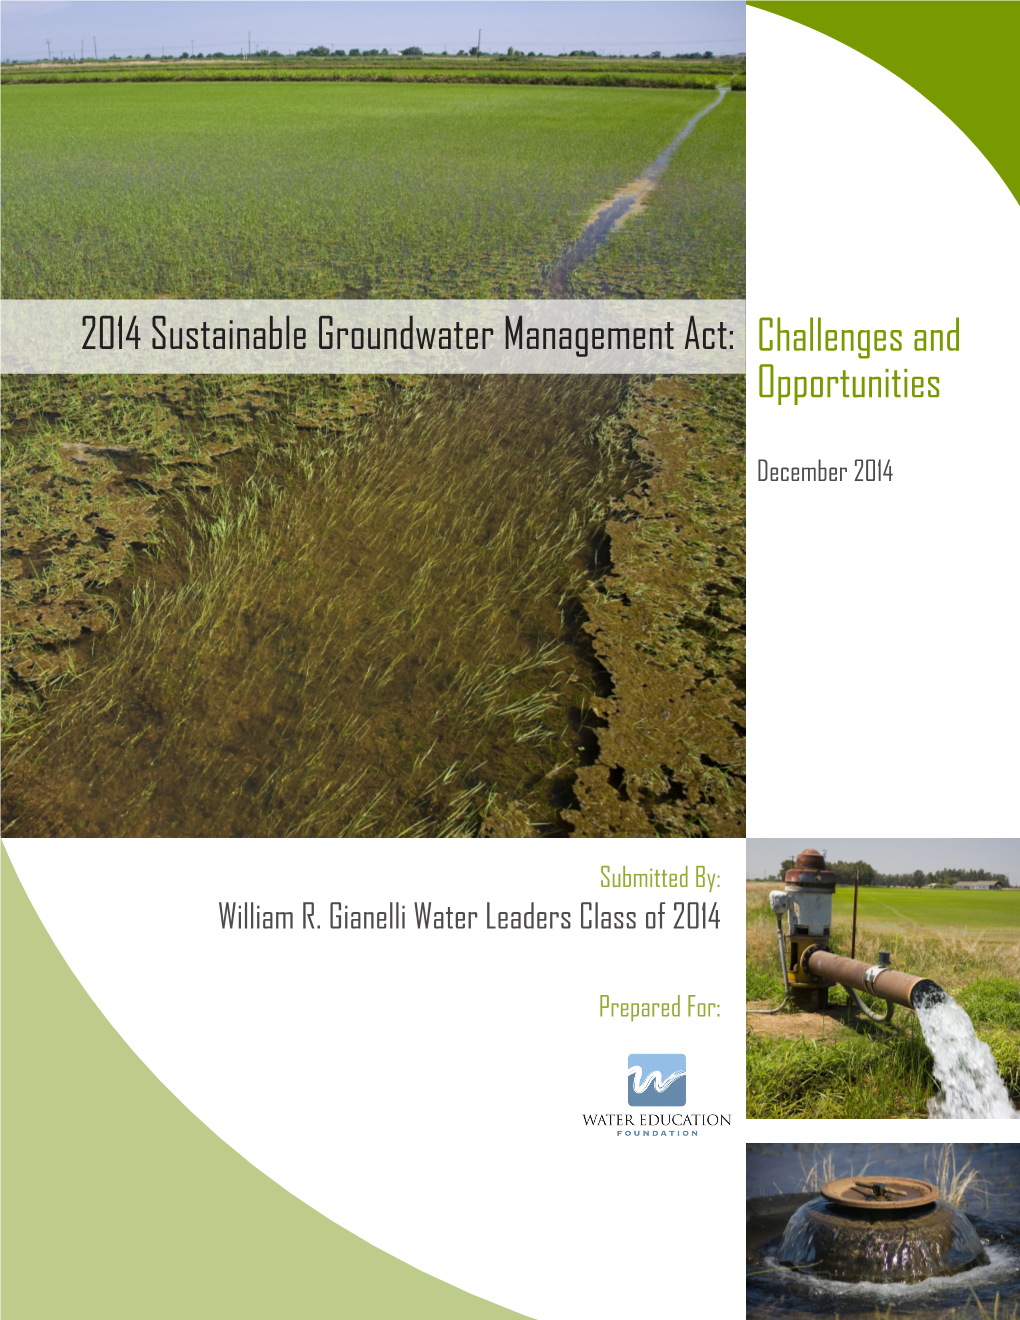 2014 Sustainable Groundwater Management Act: Challenges and Opportunities